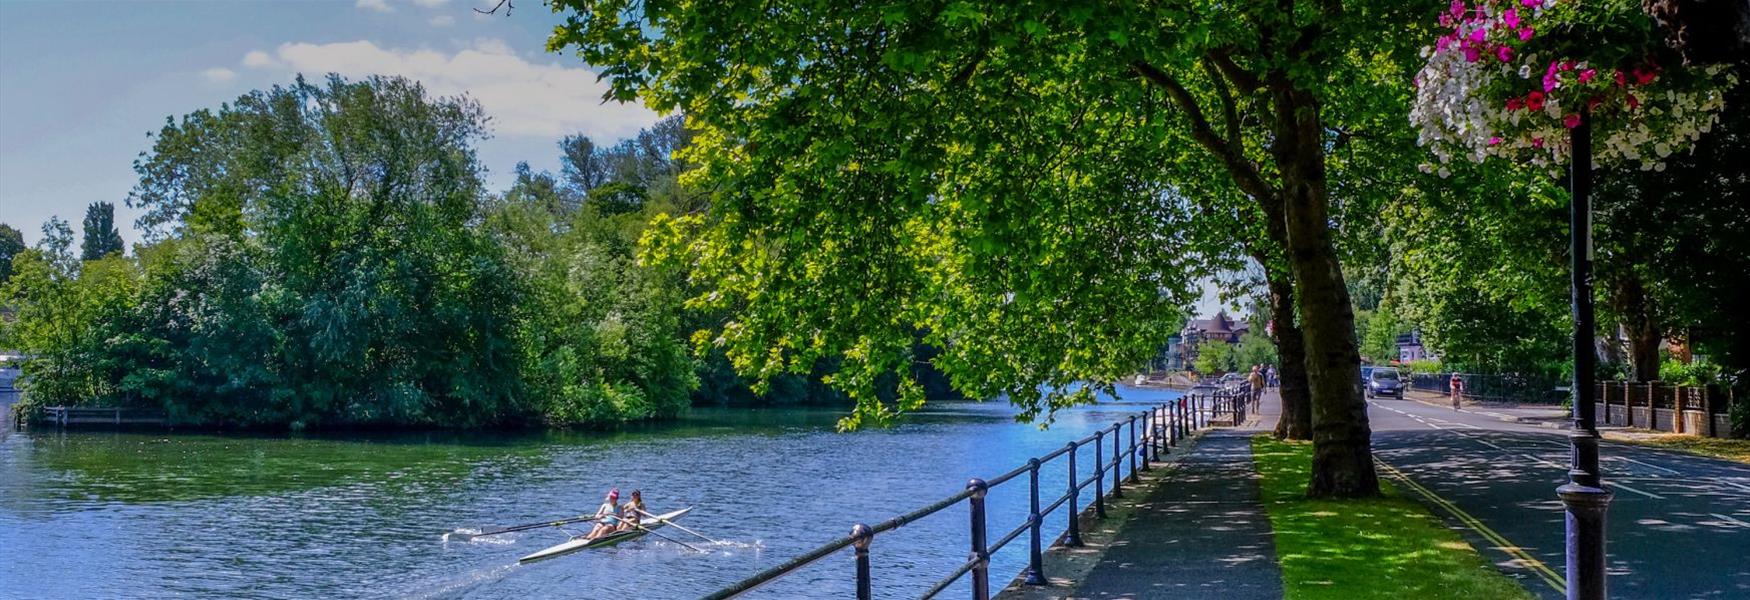 Rowers on the River Thames at Maidenhead Riverside